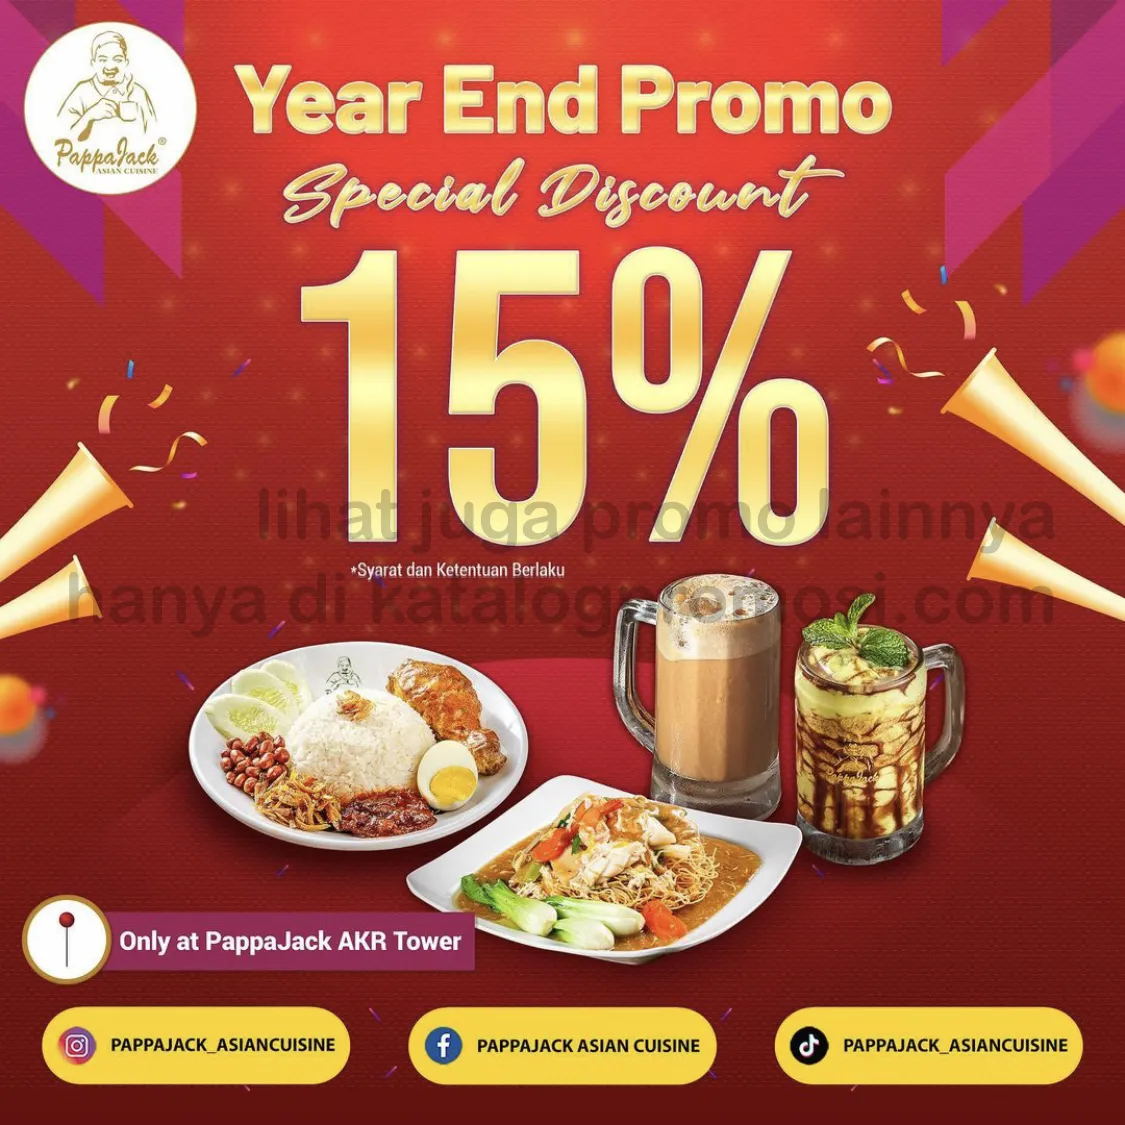 Promo PappaJack AKR Tower Year End Special - DISCOUNT 15%